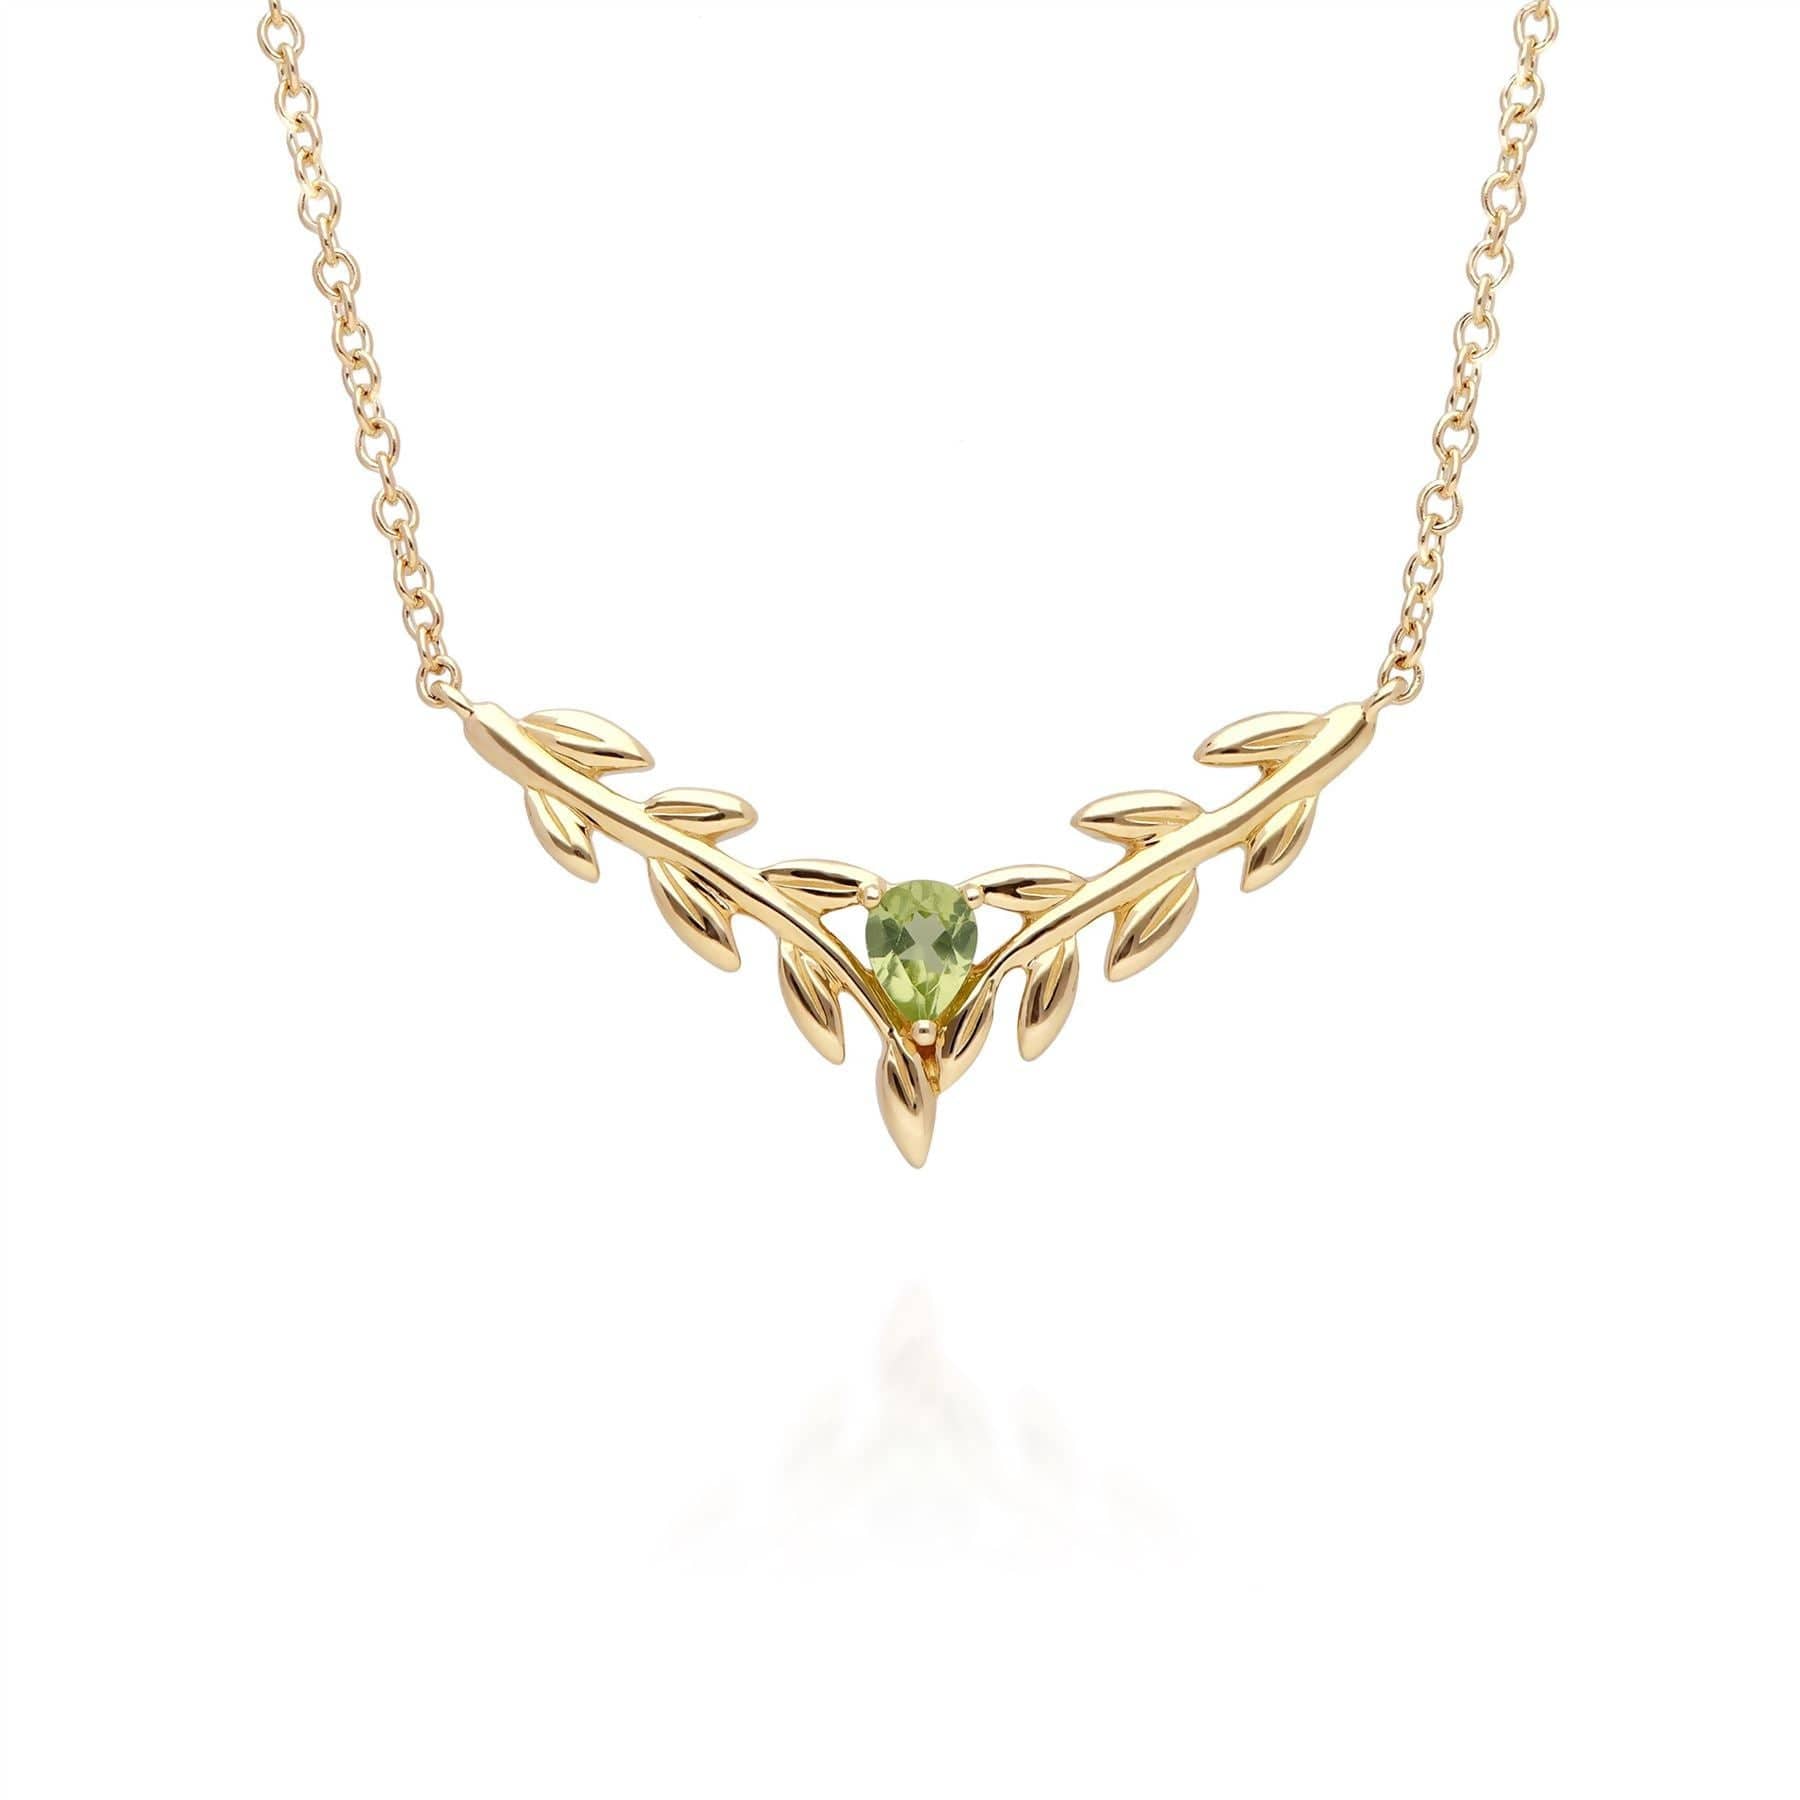 135N0366019-135L0309019 O Leaf Peridot Necklace & Bracelet Set in 9ct Yellow Gold 2